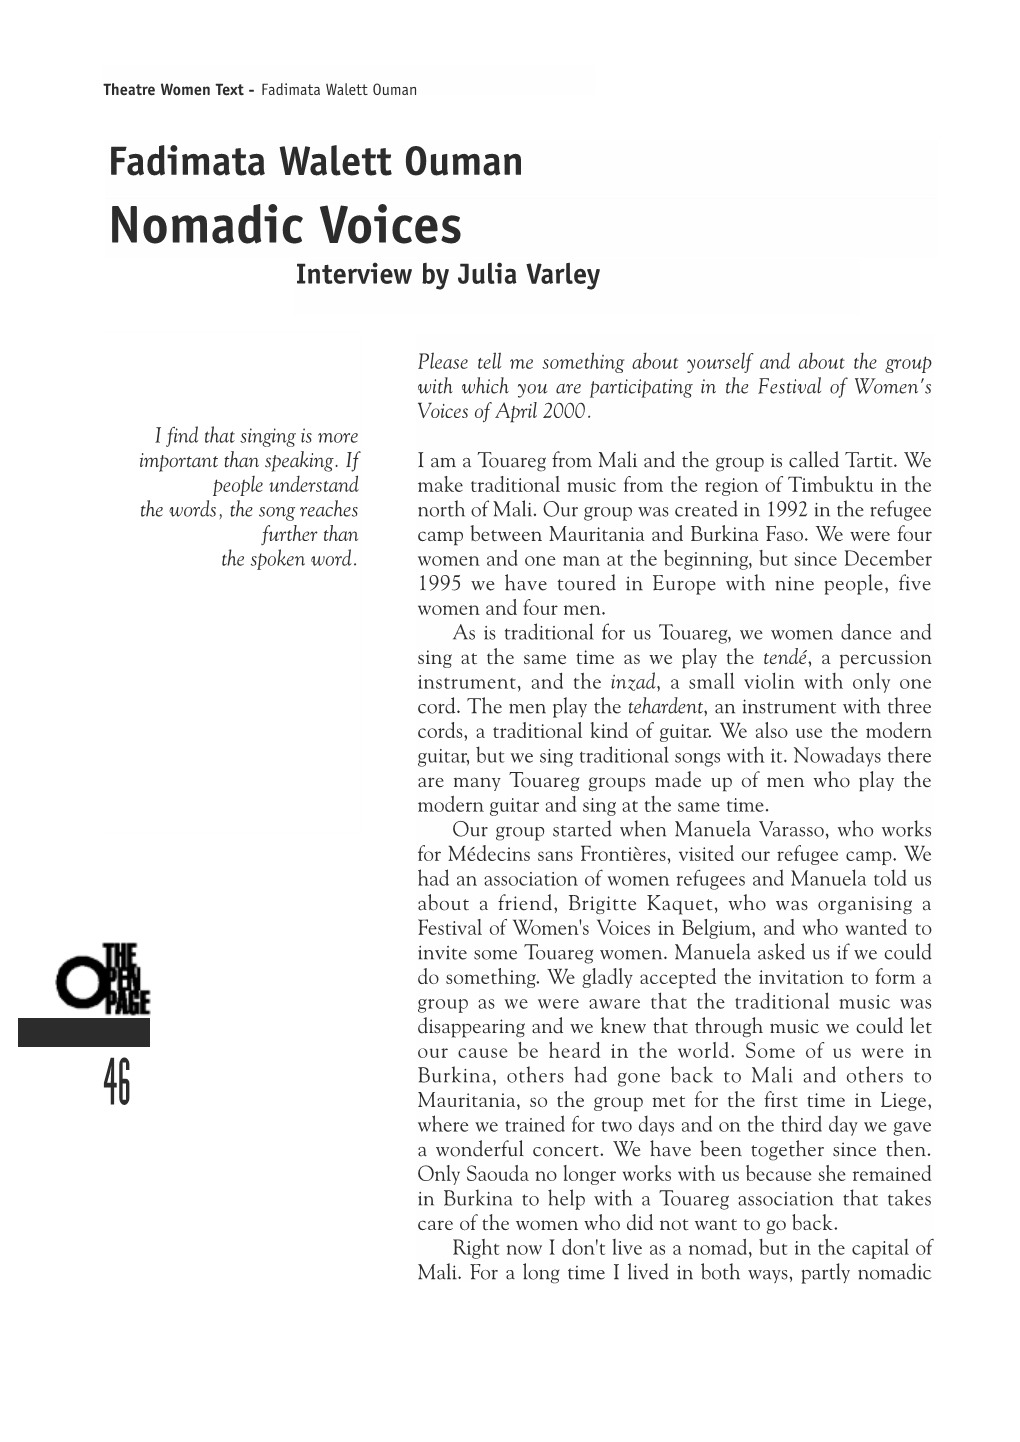 Nomadic Voices Interview by Julia Varley